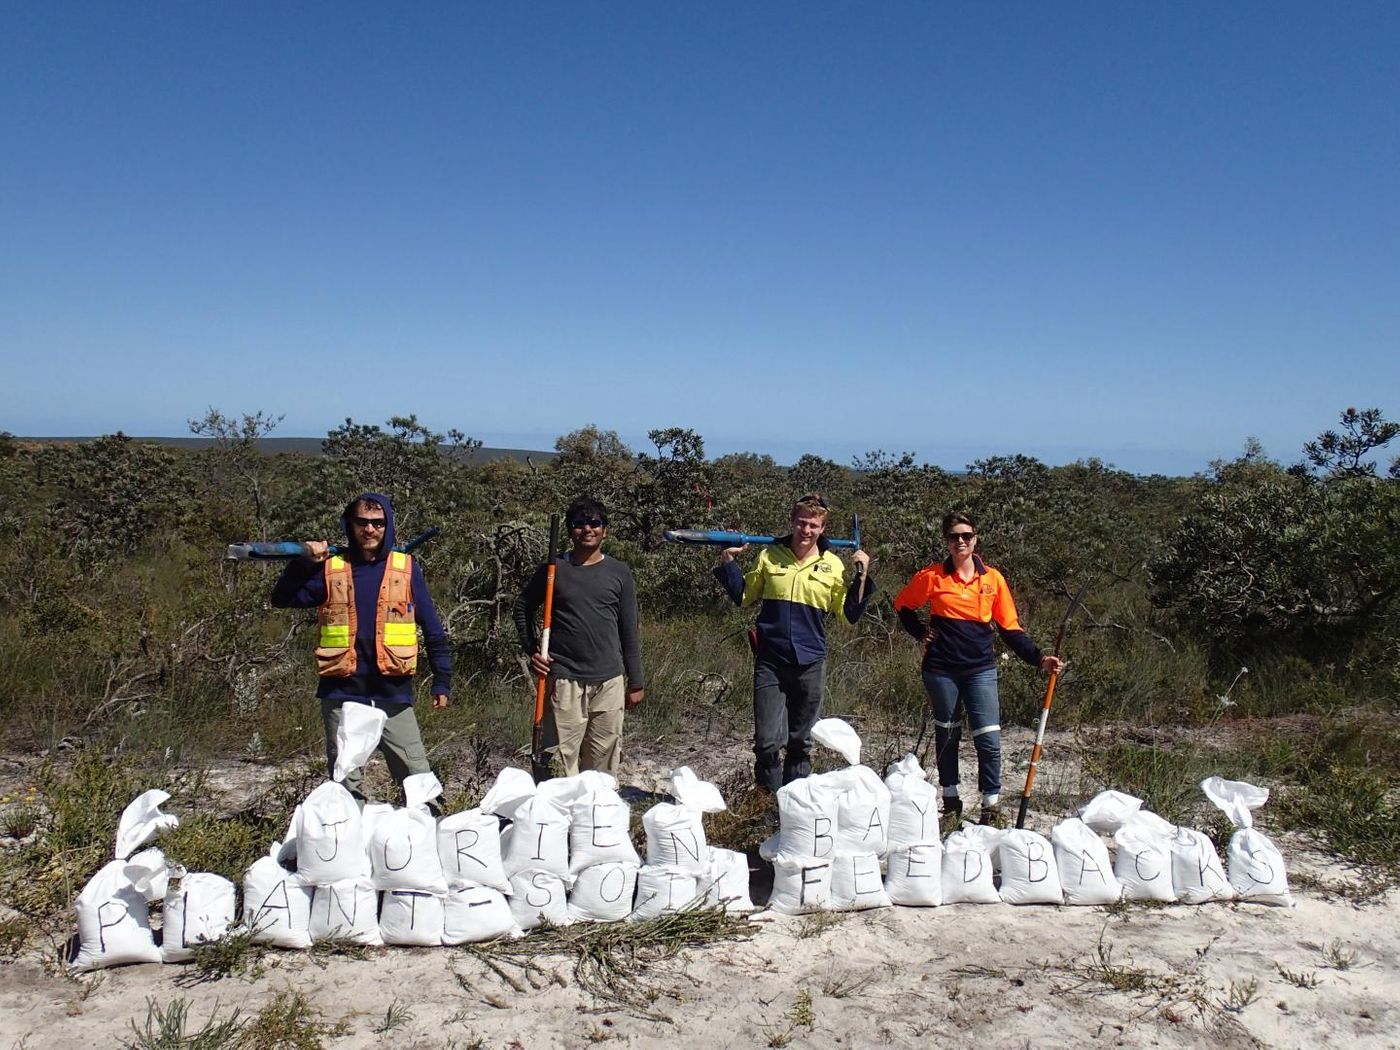 The end of a long day of soil sampling in the Jurien Bay shrublands. CREDIT Francois Teste